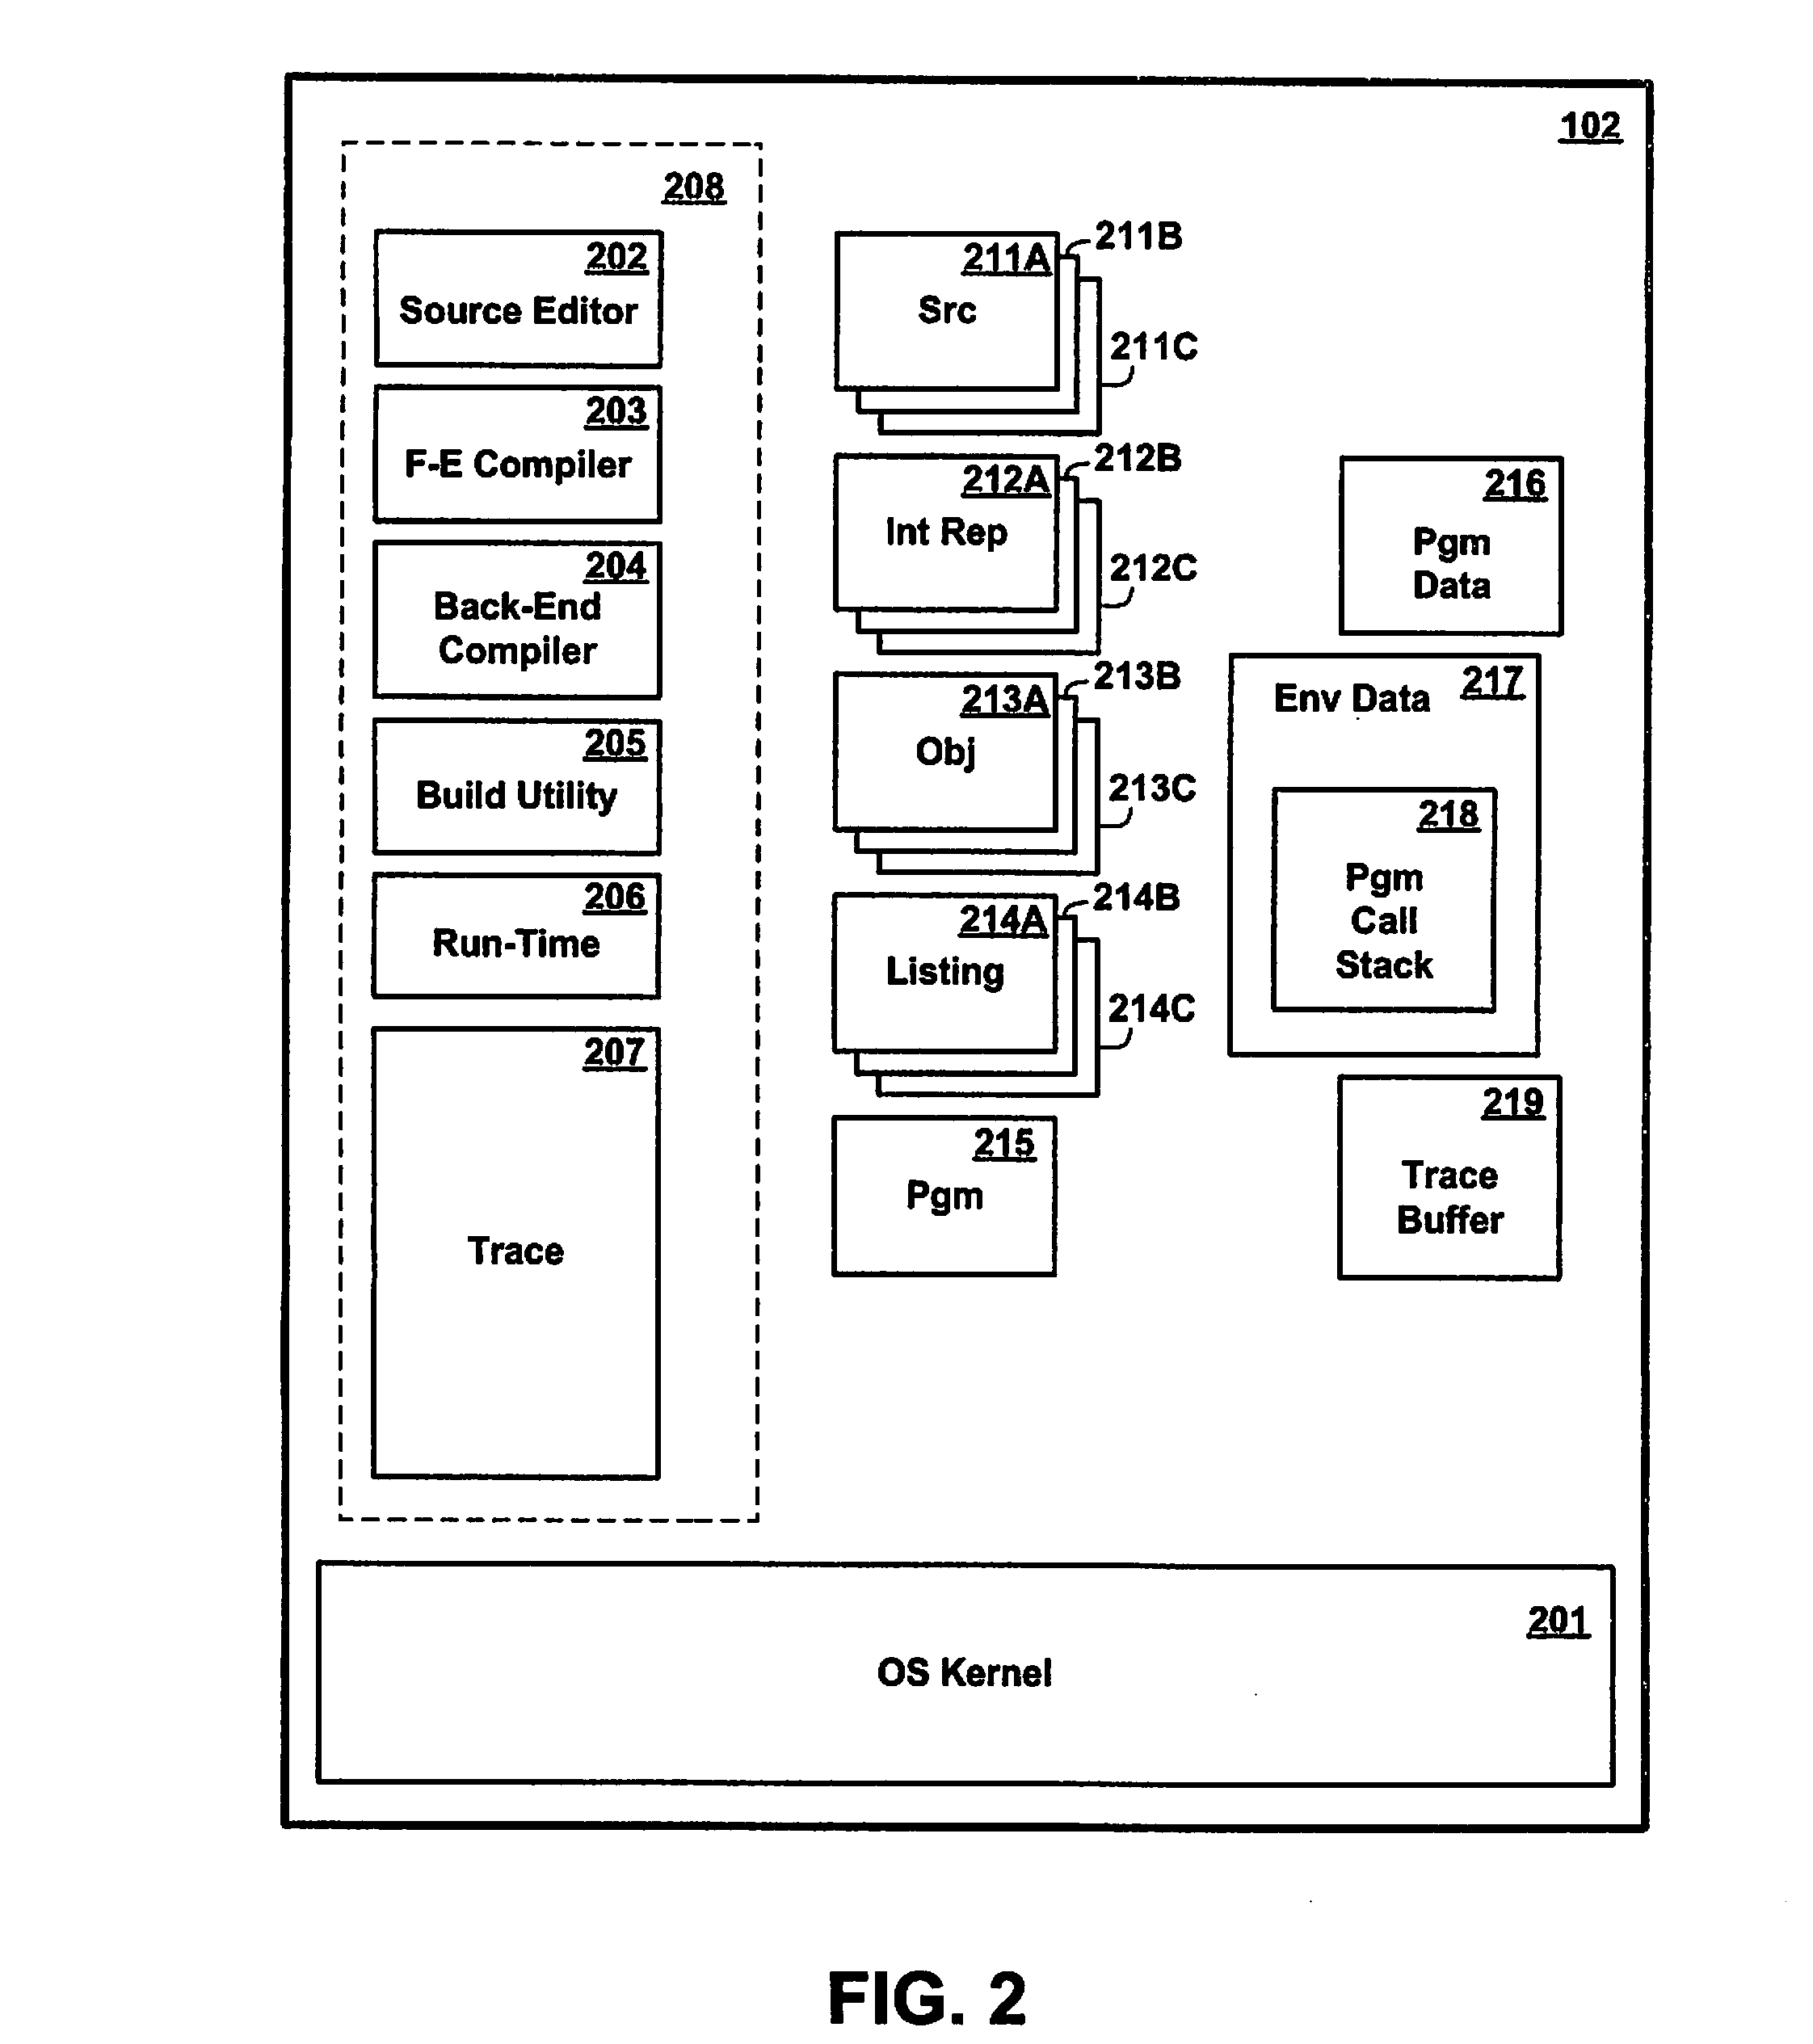 Method and Apparatus for Tracing Execution of Computer Programming Code Using Dynamic Trace Enablement